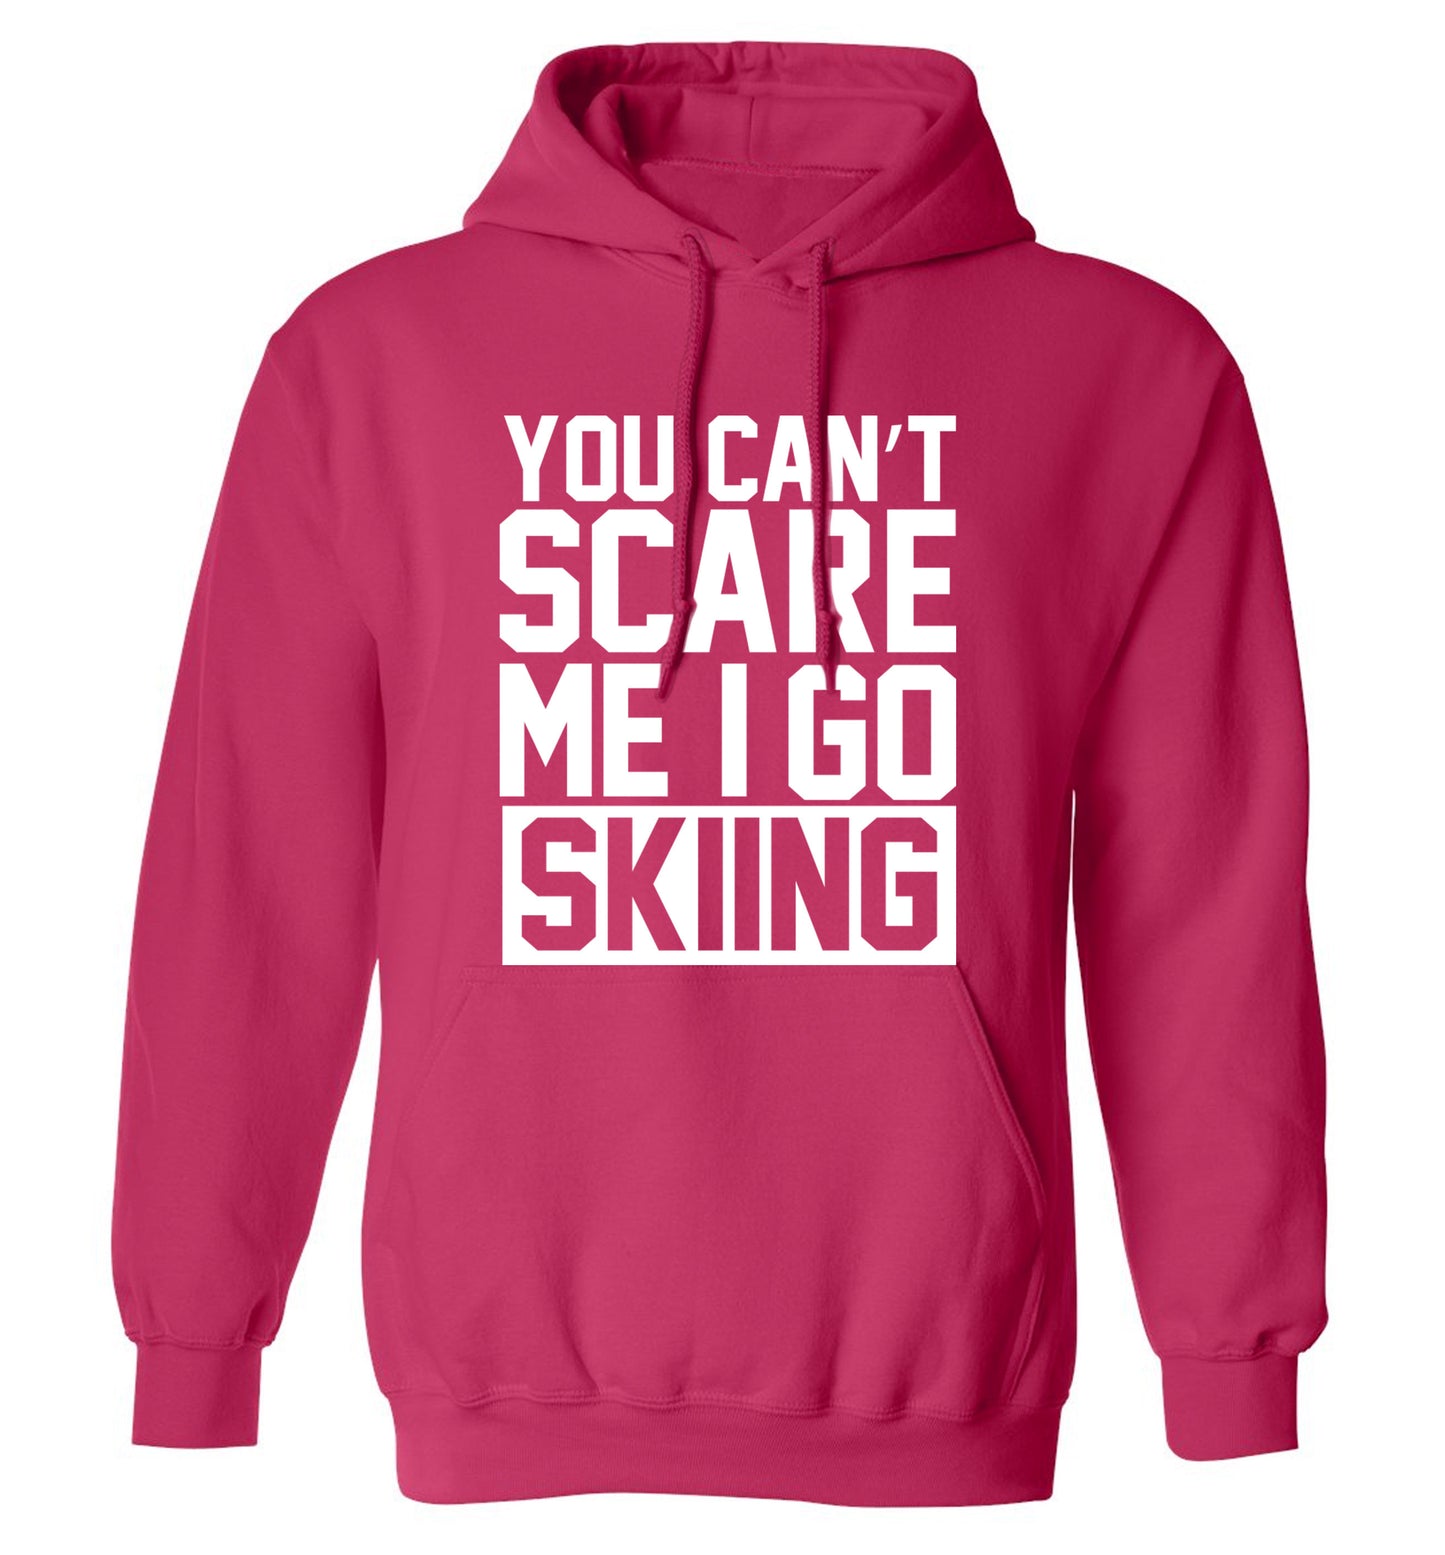 You can't scare me I go skiing adults unisex pink hoodie 2XL